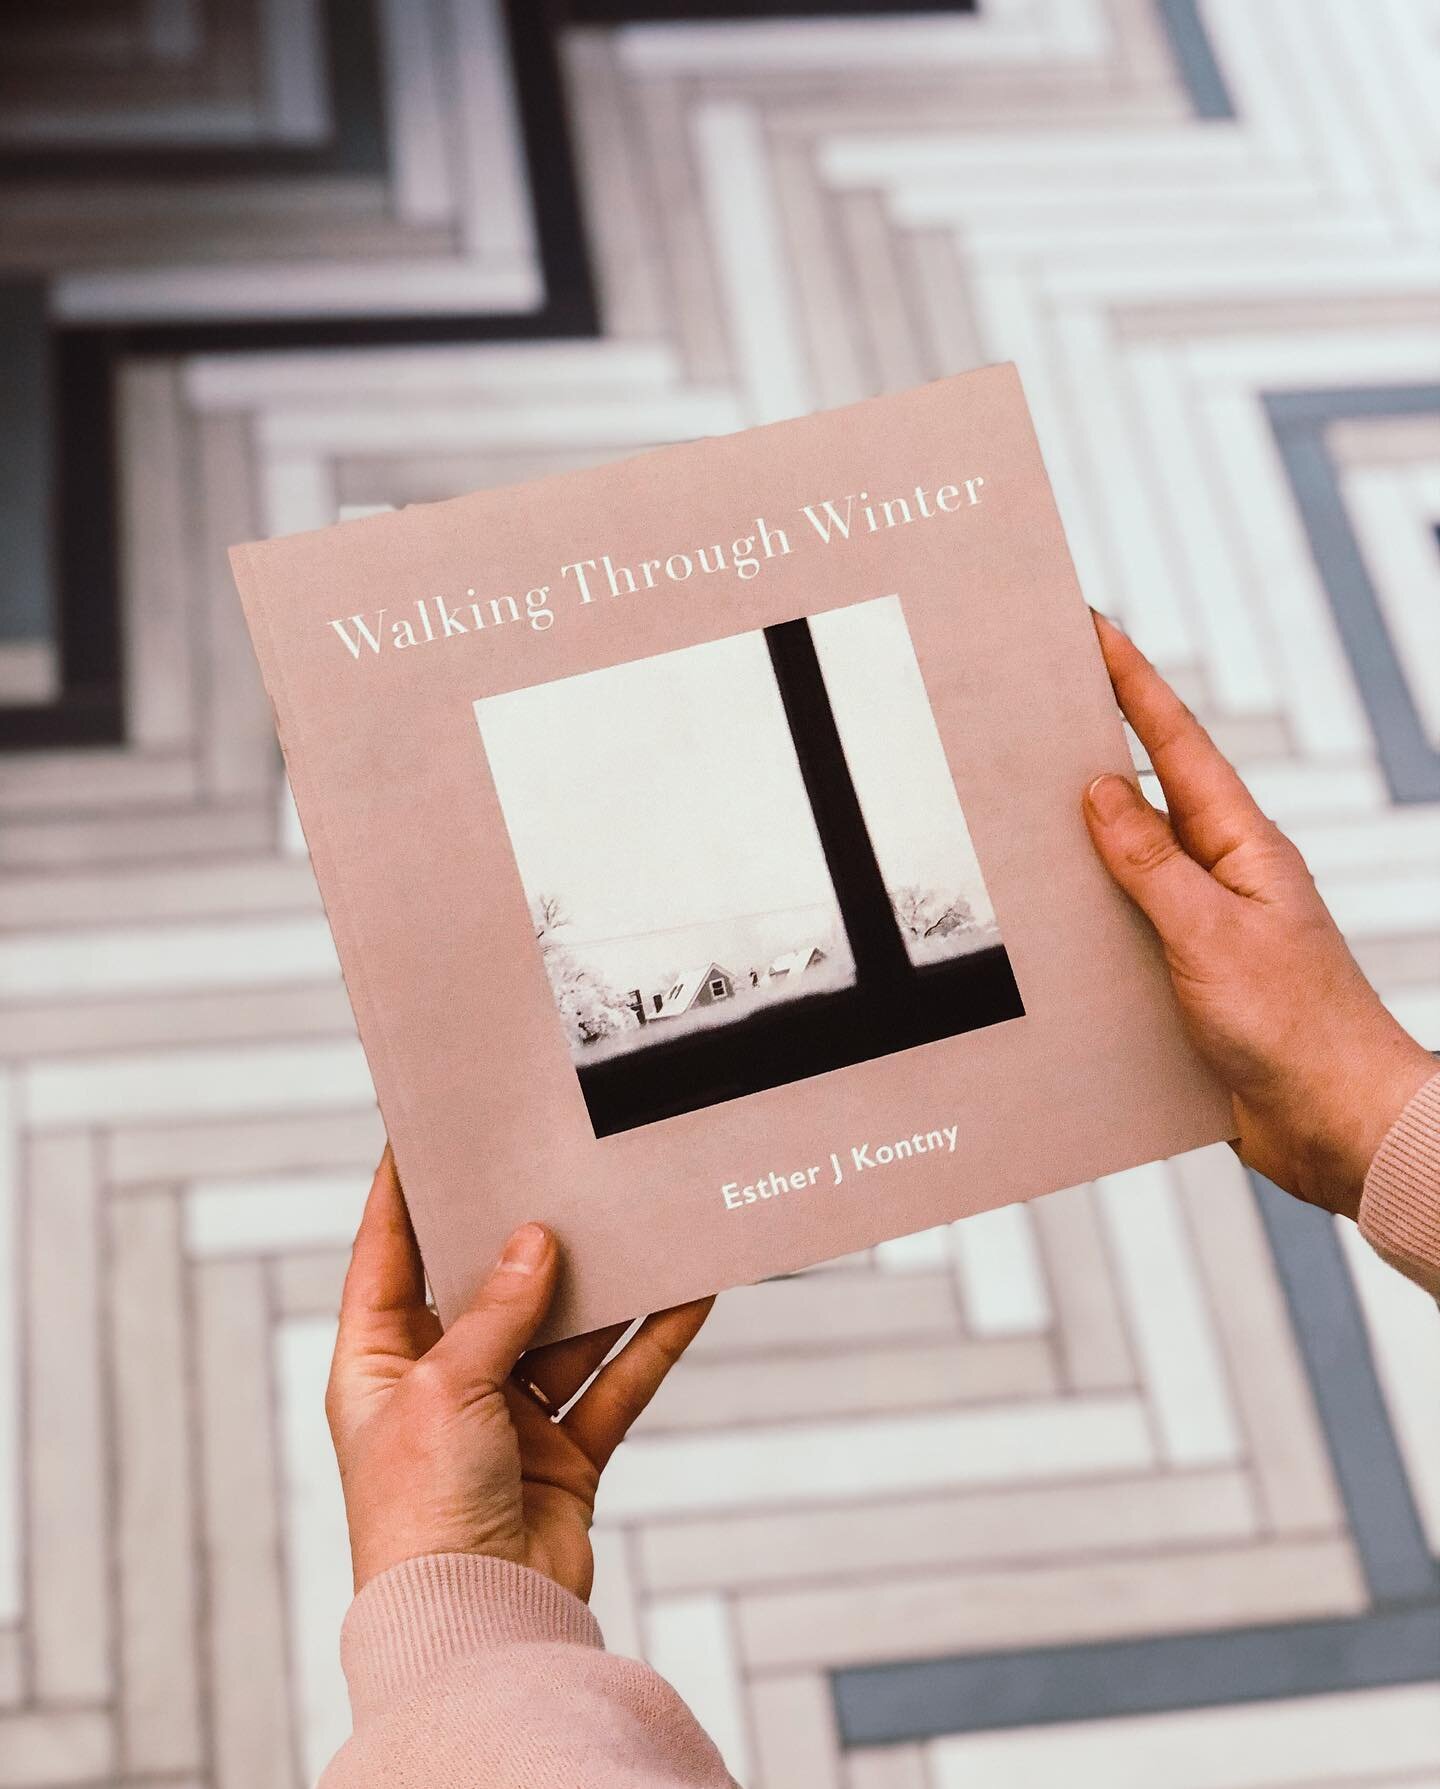 Giveaway winner is&hellip;
*drumroll*

@flickhur !!
Congrats, you will receive an 8by8 print along with a signed copy of Walking Through Winter!
Thanks to everyone who entered, you can still preorder the book on my website and all orders will be sent